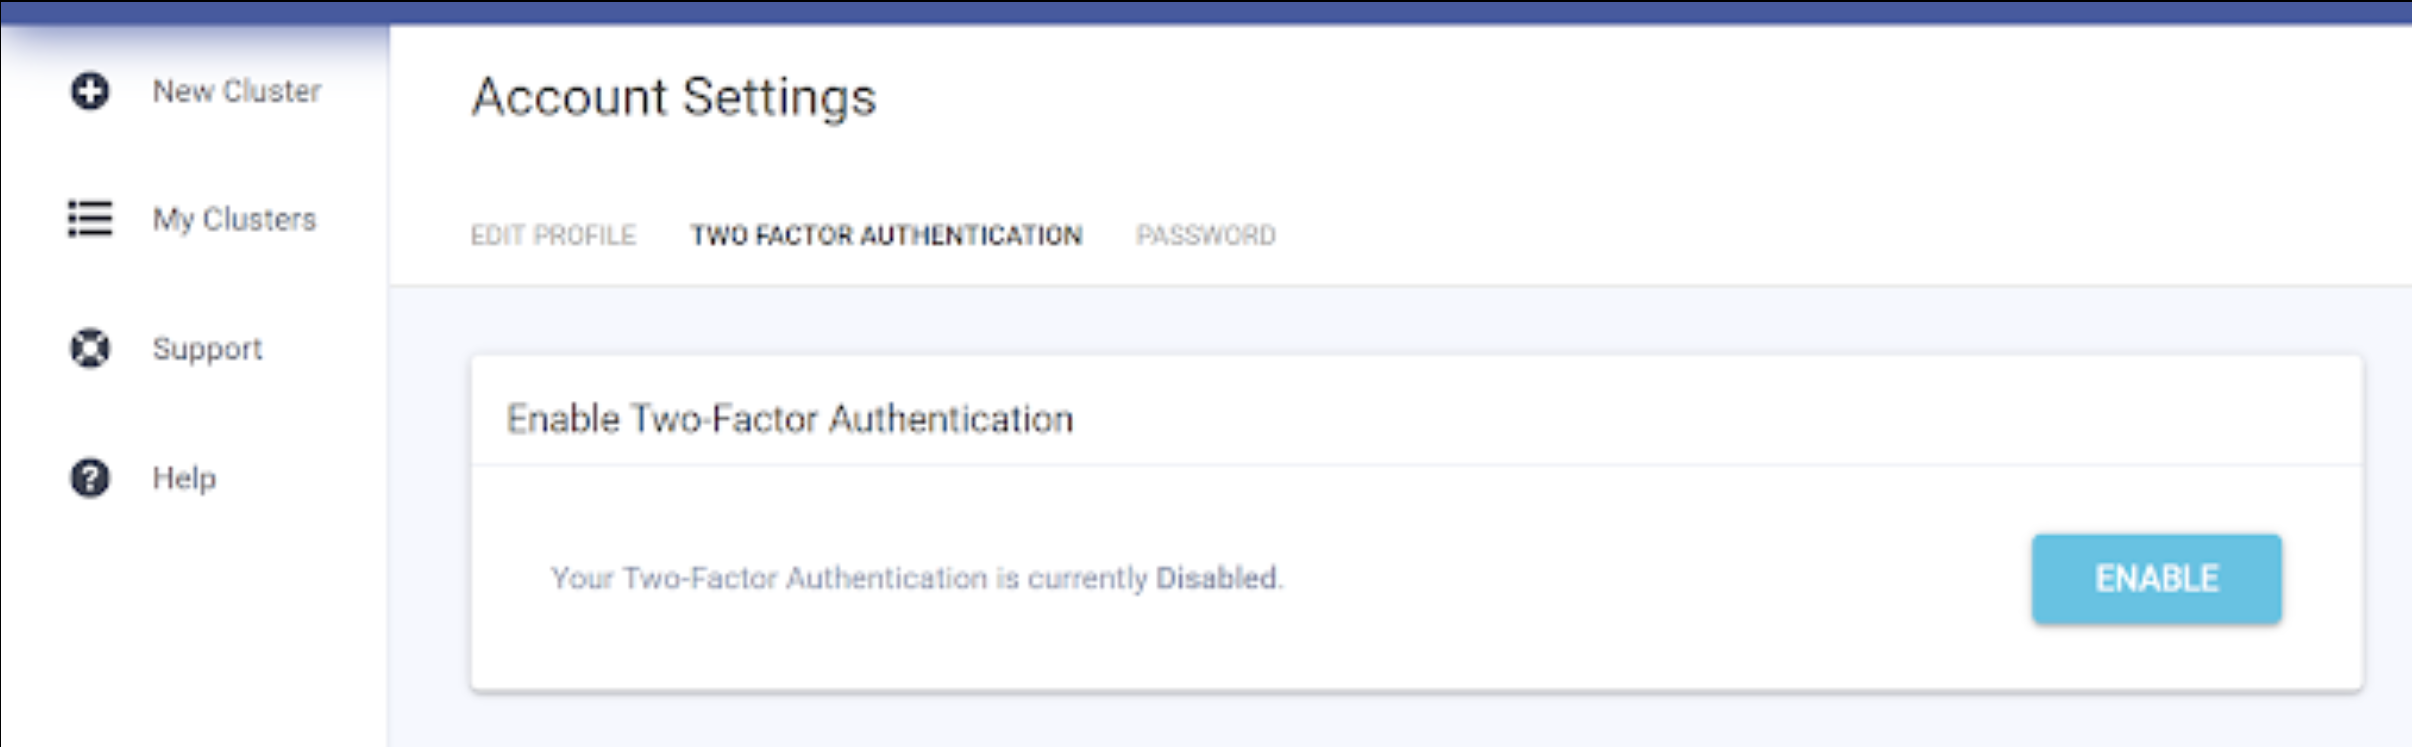 Enabling Two-Factor Authentication (2FA) in Scylla Cloud